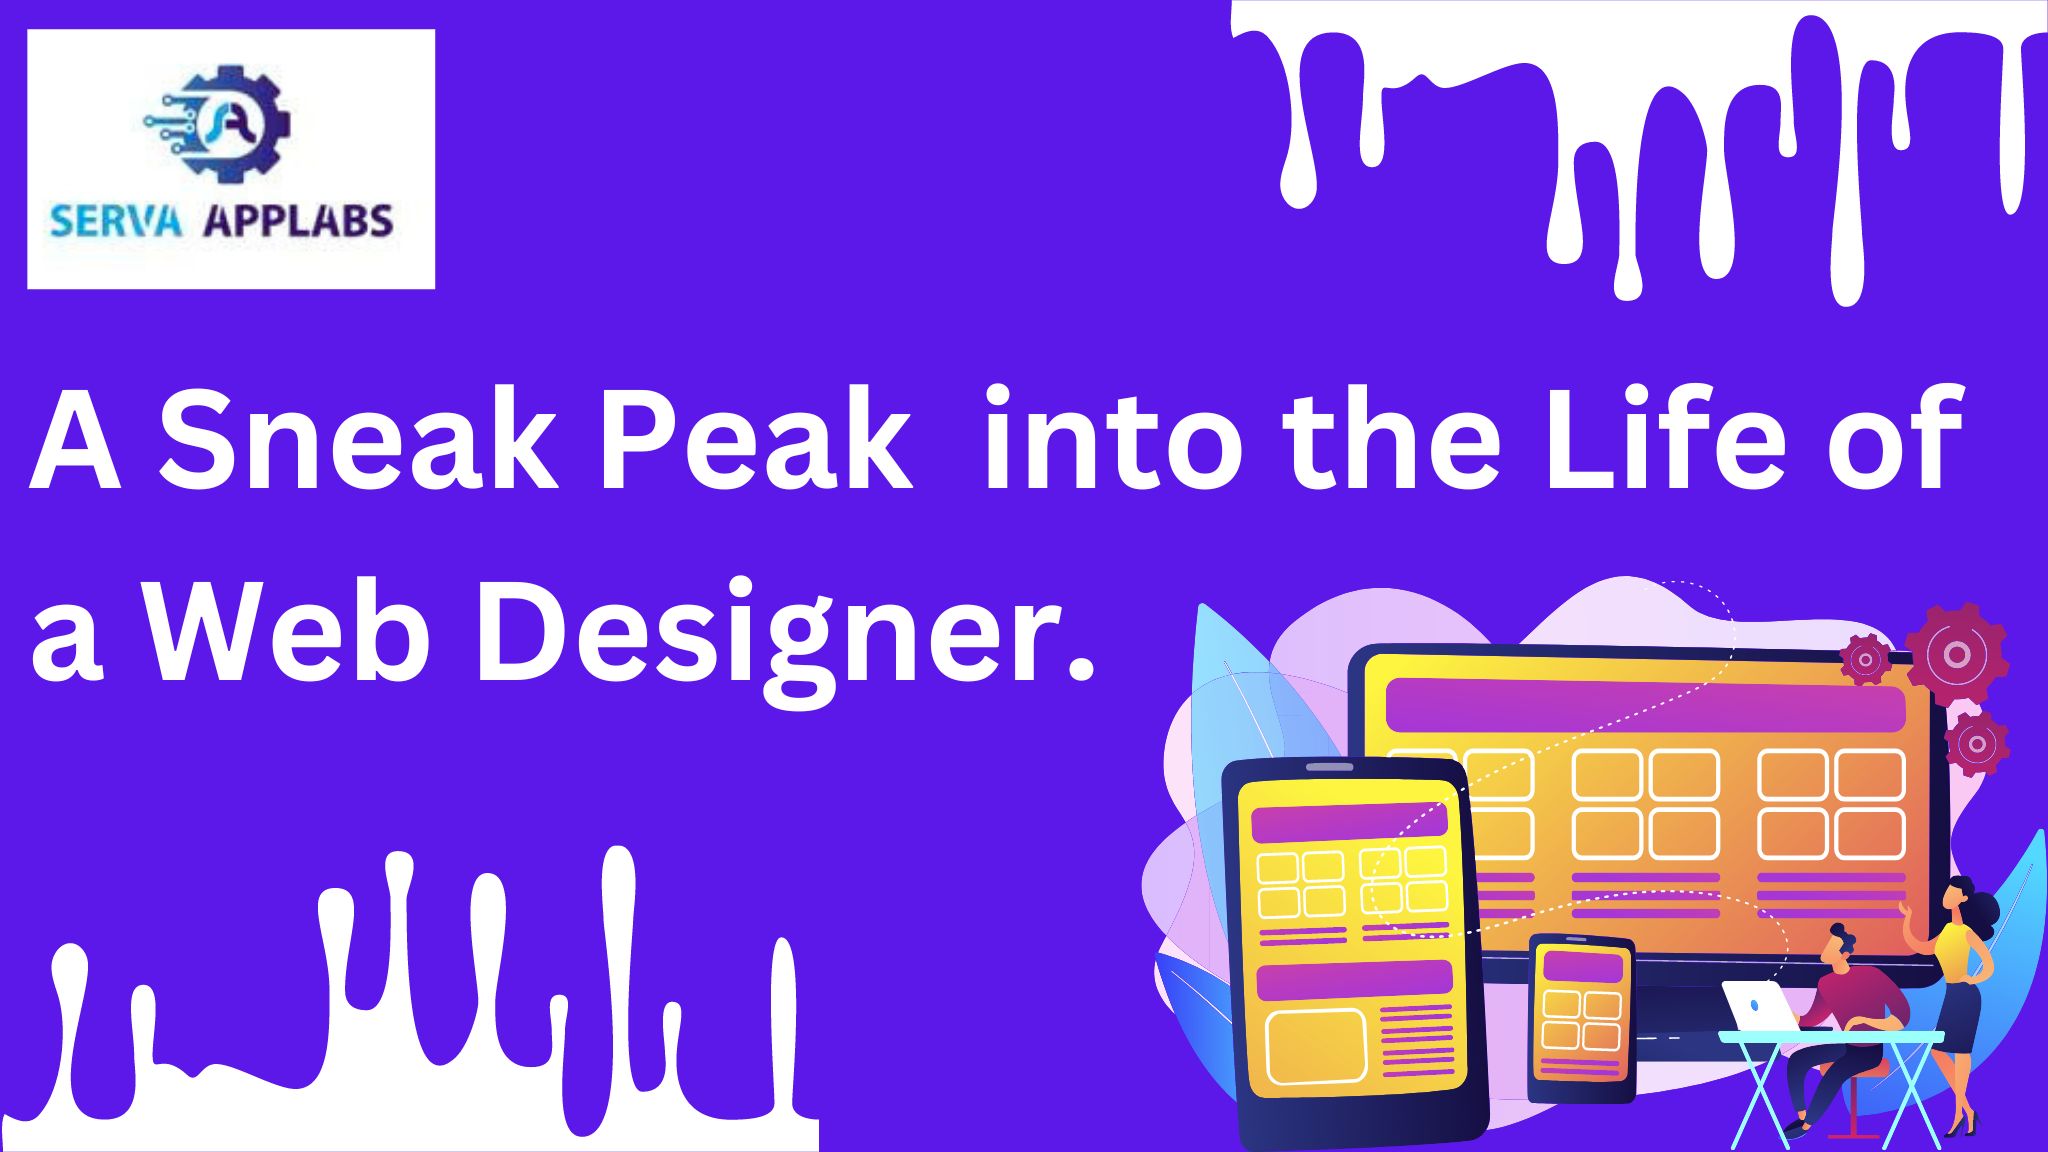 You are currently viewing A Sneak Peak into the Life of a Web Designer